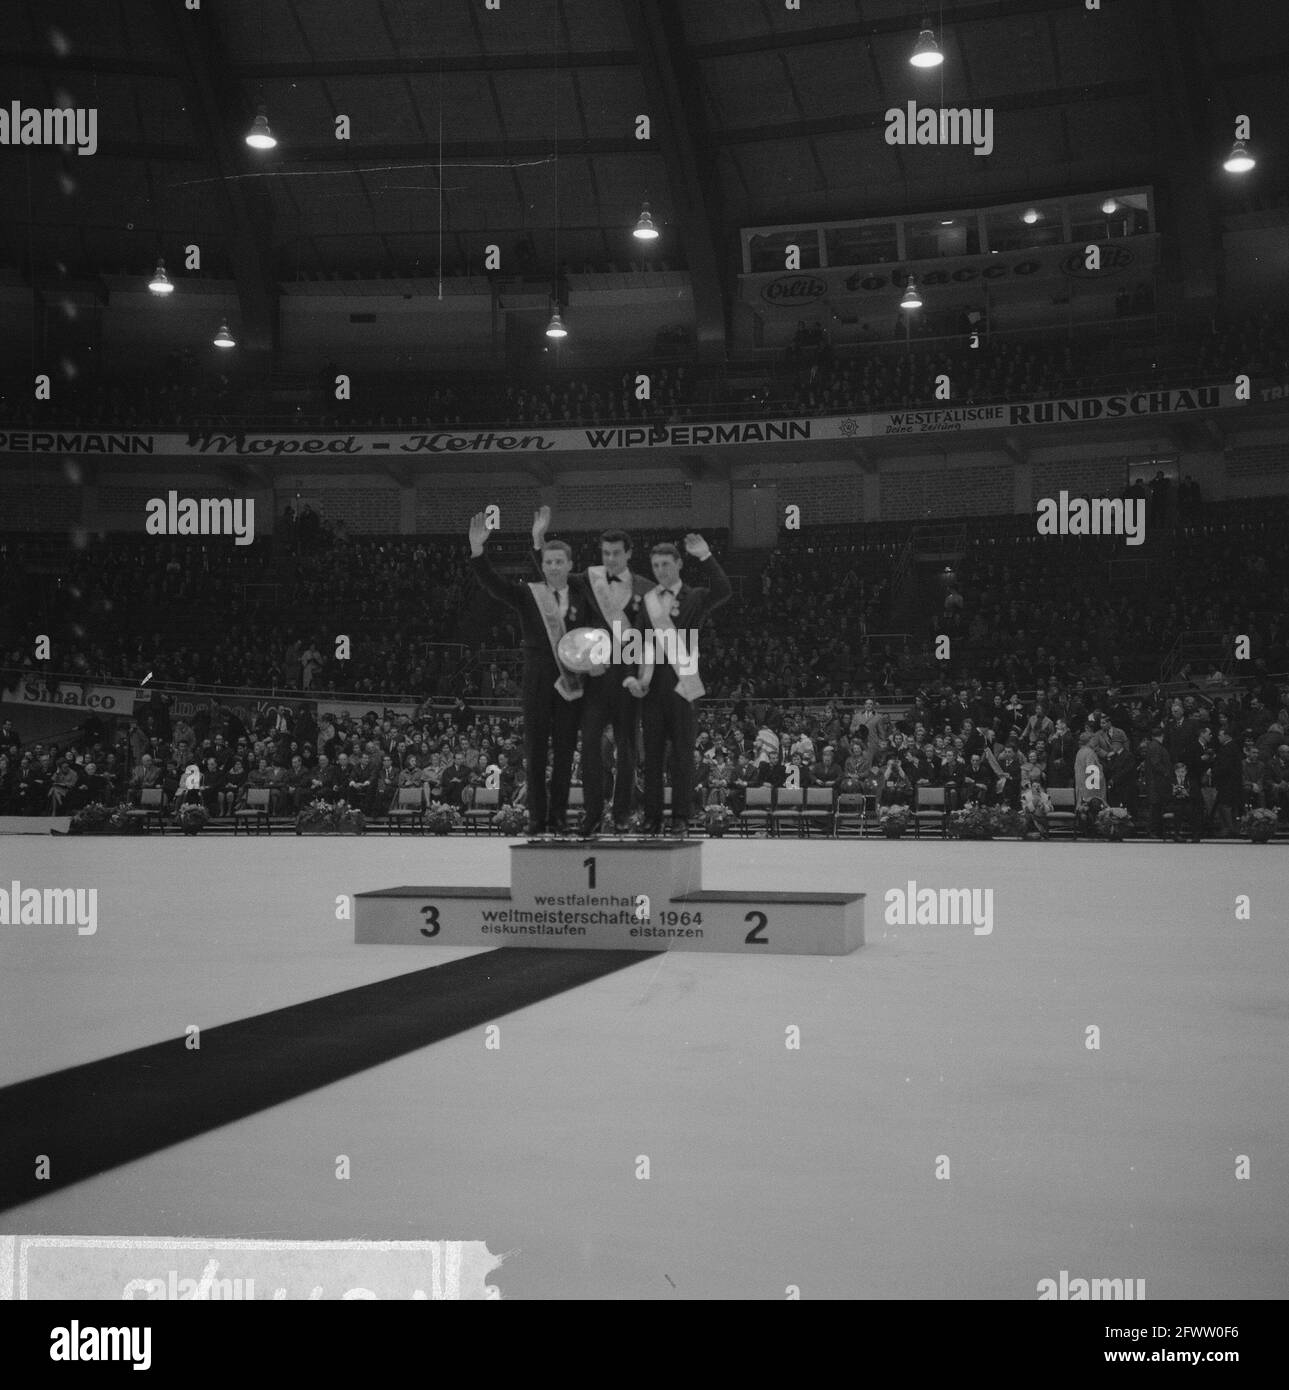 On honorary rostrum from left to right Karol Divin (Czechoslovakia), Manfred Schnelldorfer and Alain Calmat, February 29, 1964, figure skating, The Netherlands, 20th century press agency photo, news to remember, documentary, historic photography 1945-1990, visual stories, human history of the Twentieth Century, capturing moments in time Stock Photo